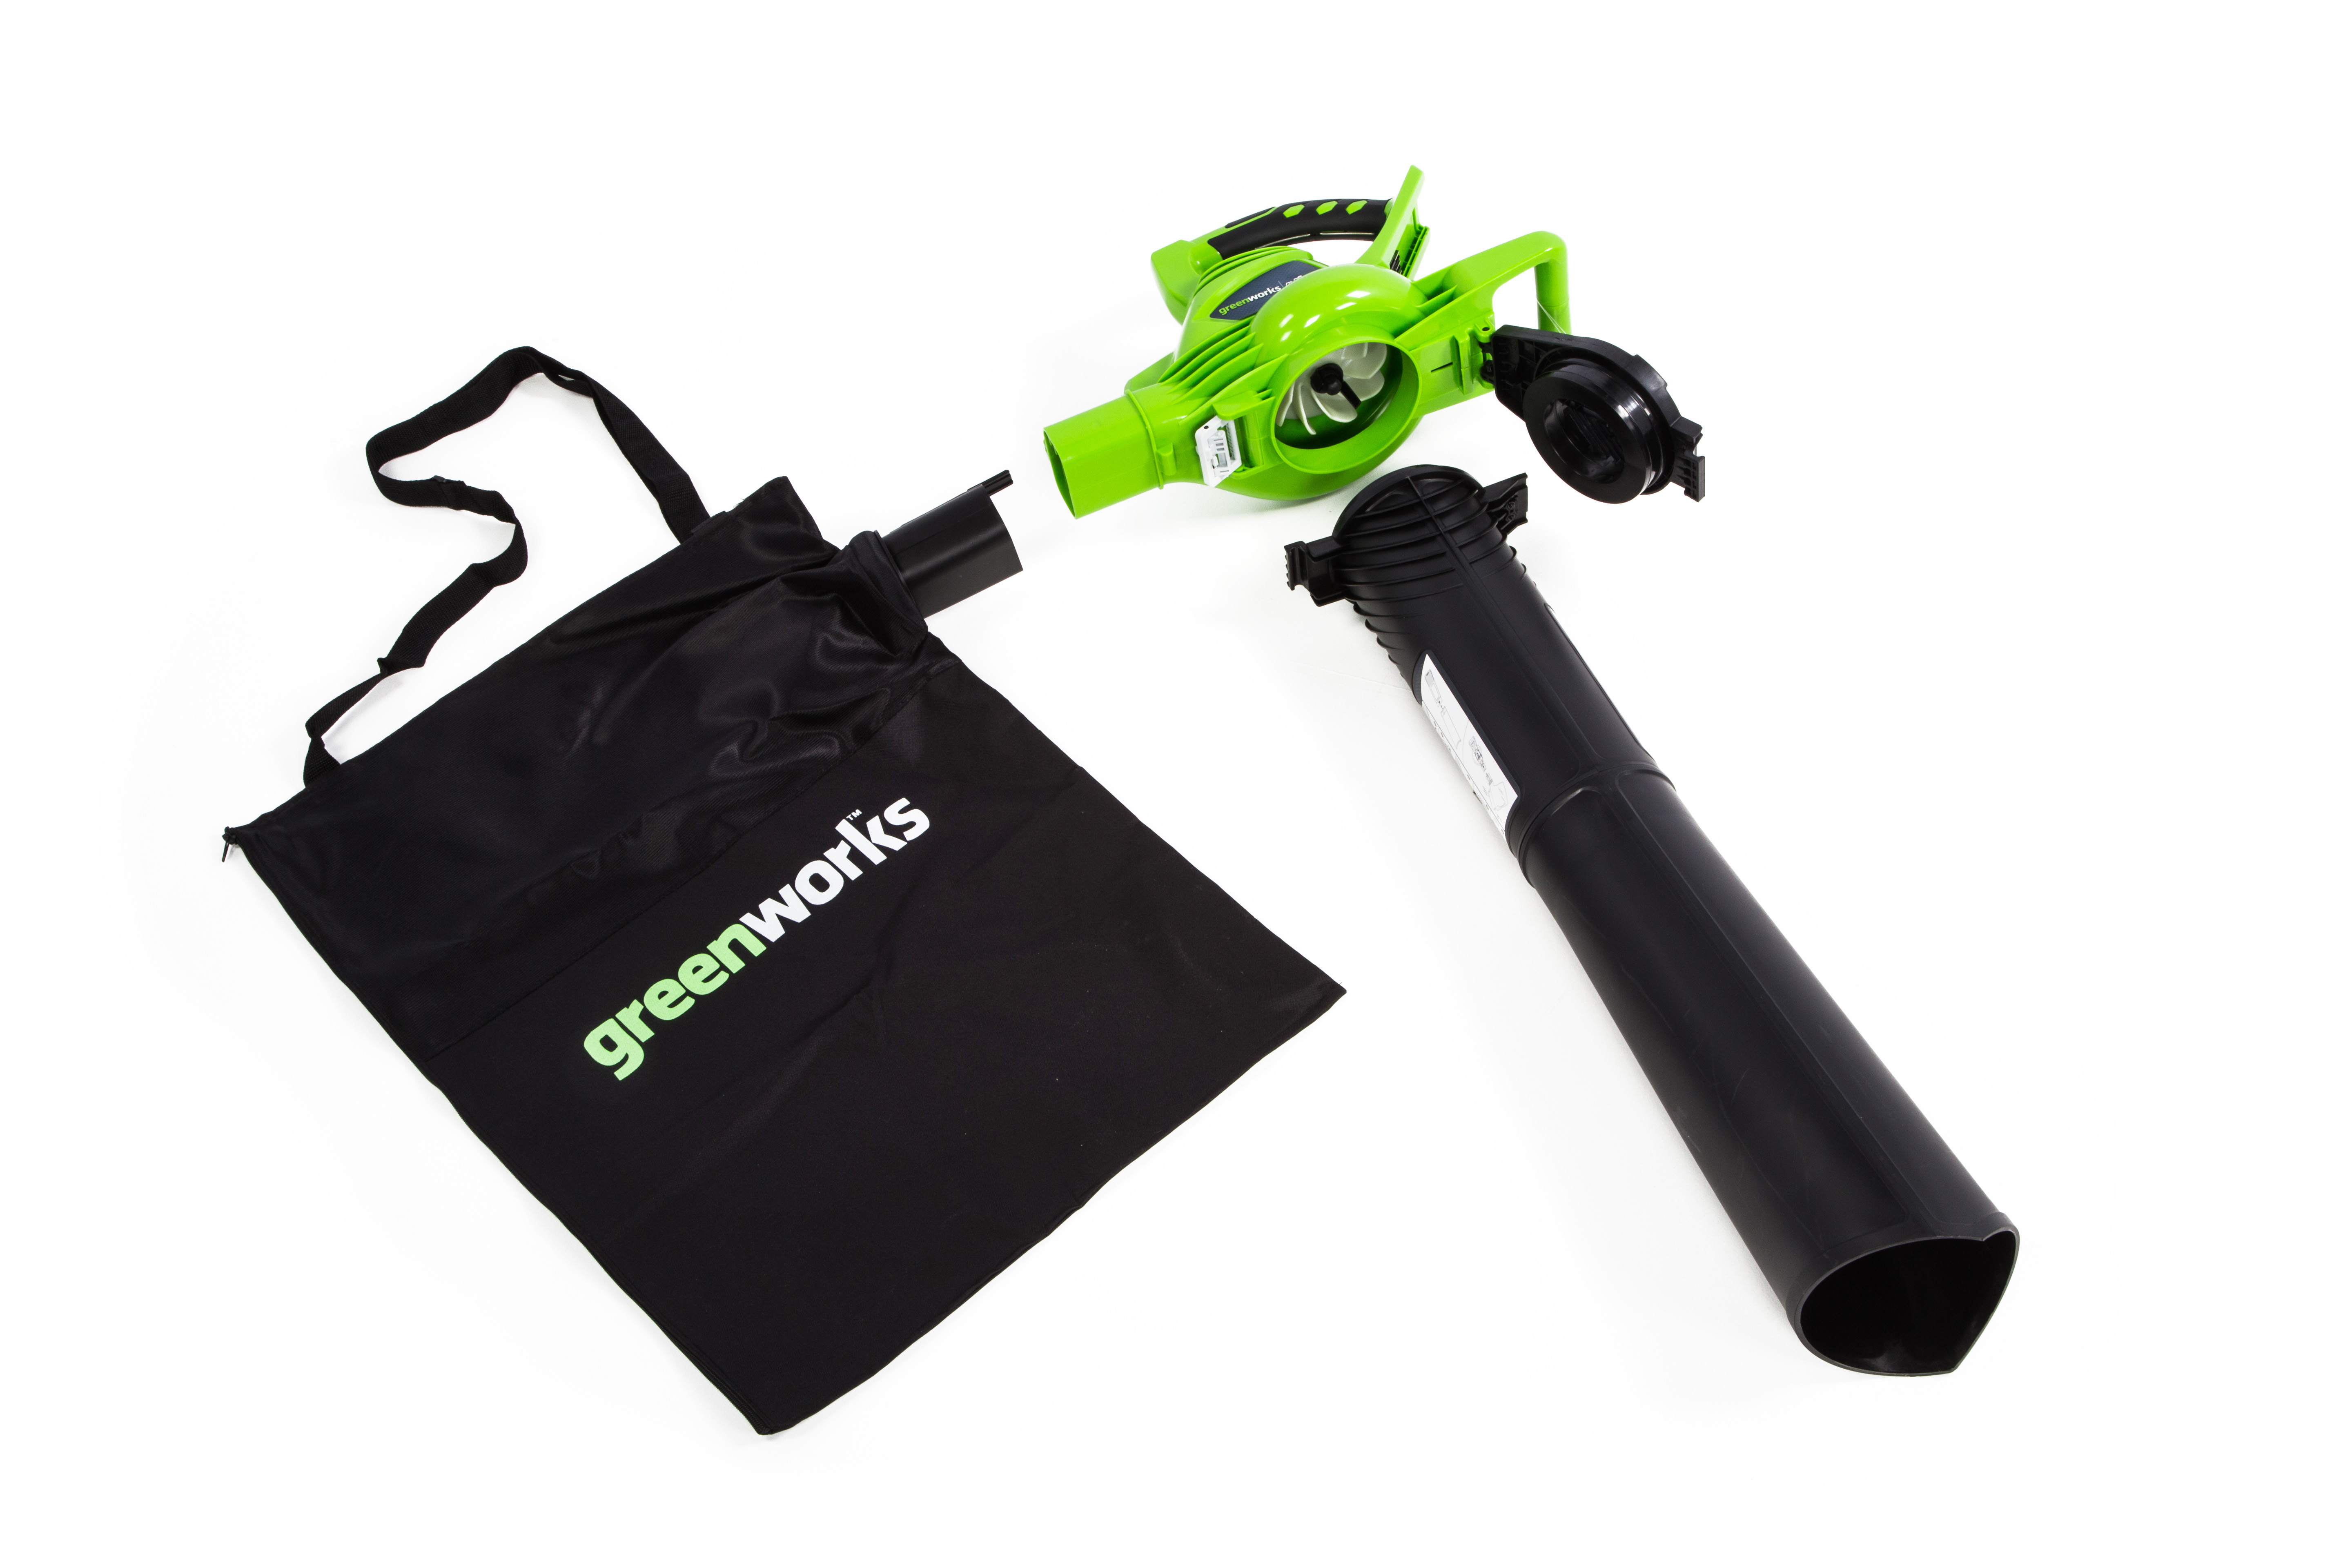 Greenworks 40V 340 CFM Leaf Blower/Vacuum with 4.0 Ah Battery and Charger, 24322 - image 3 of 7